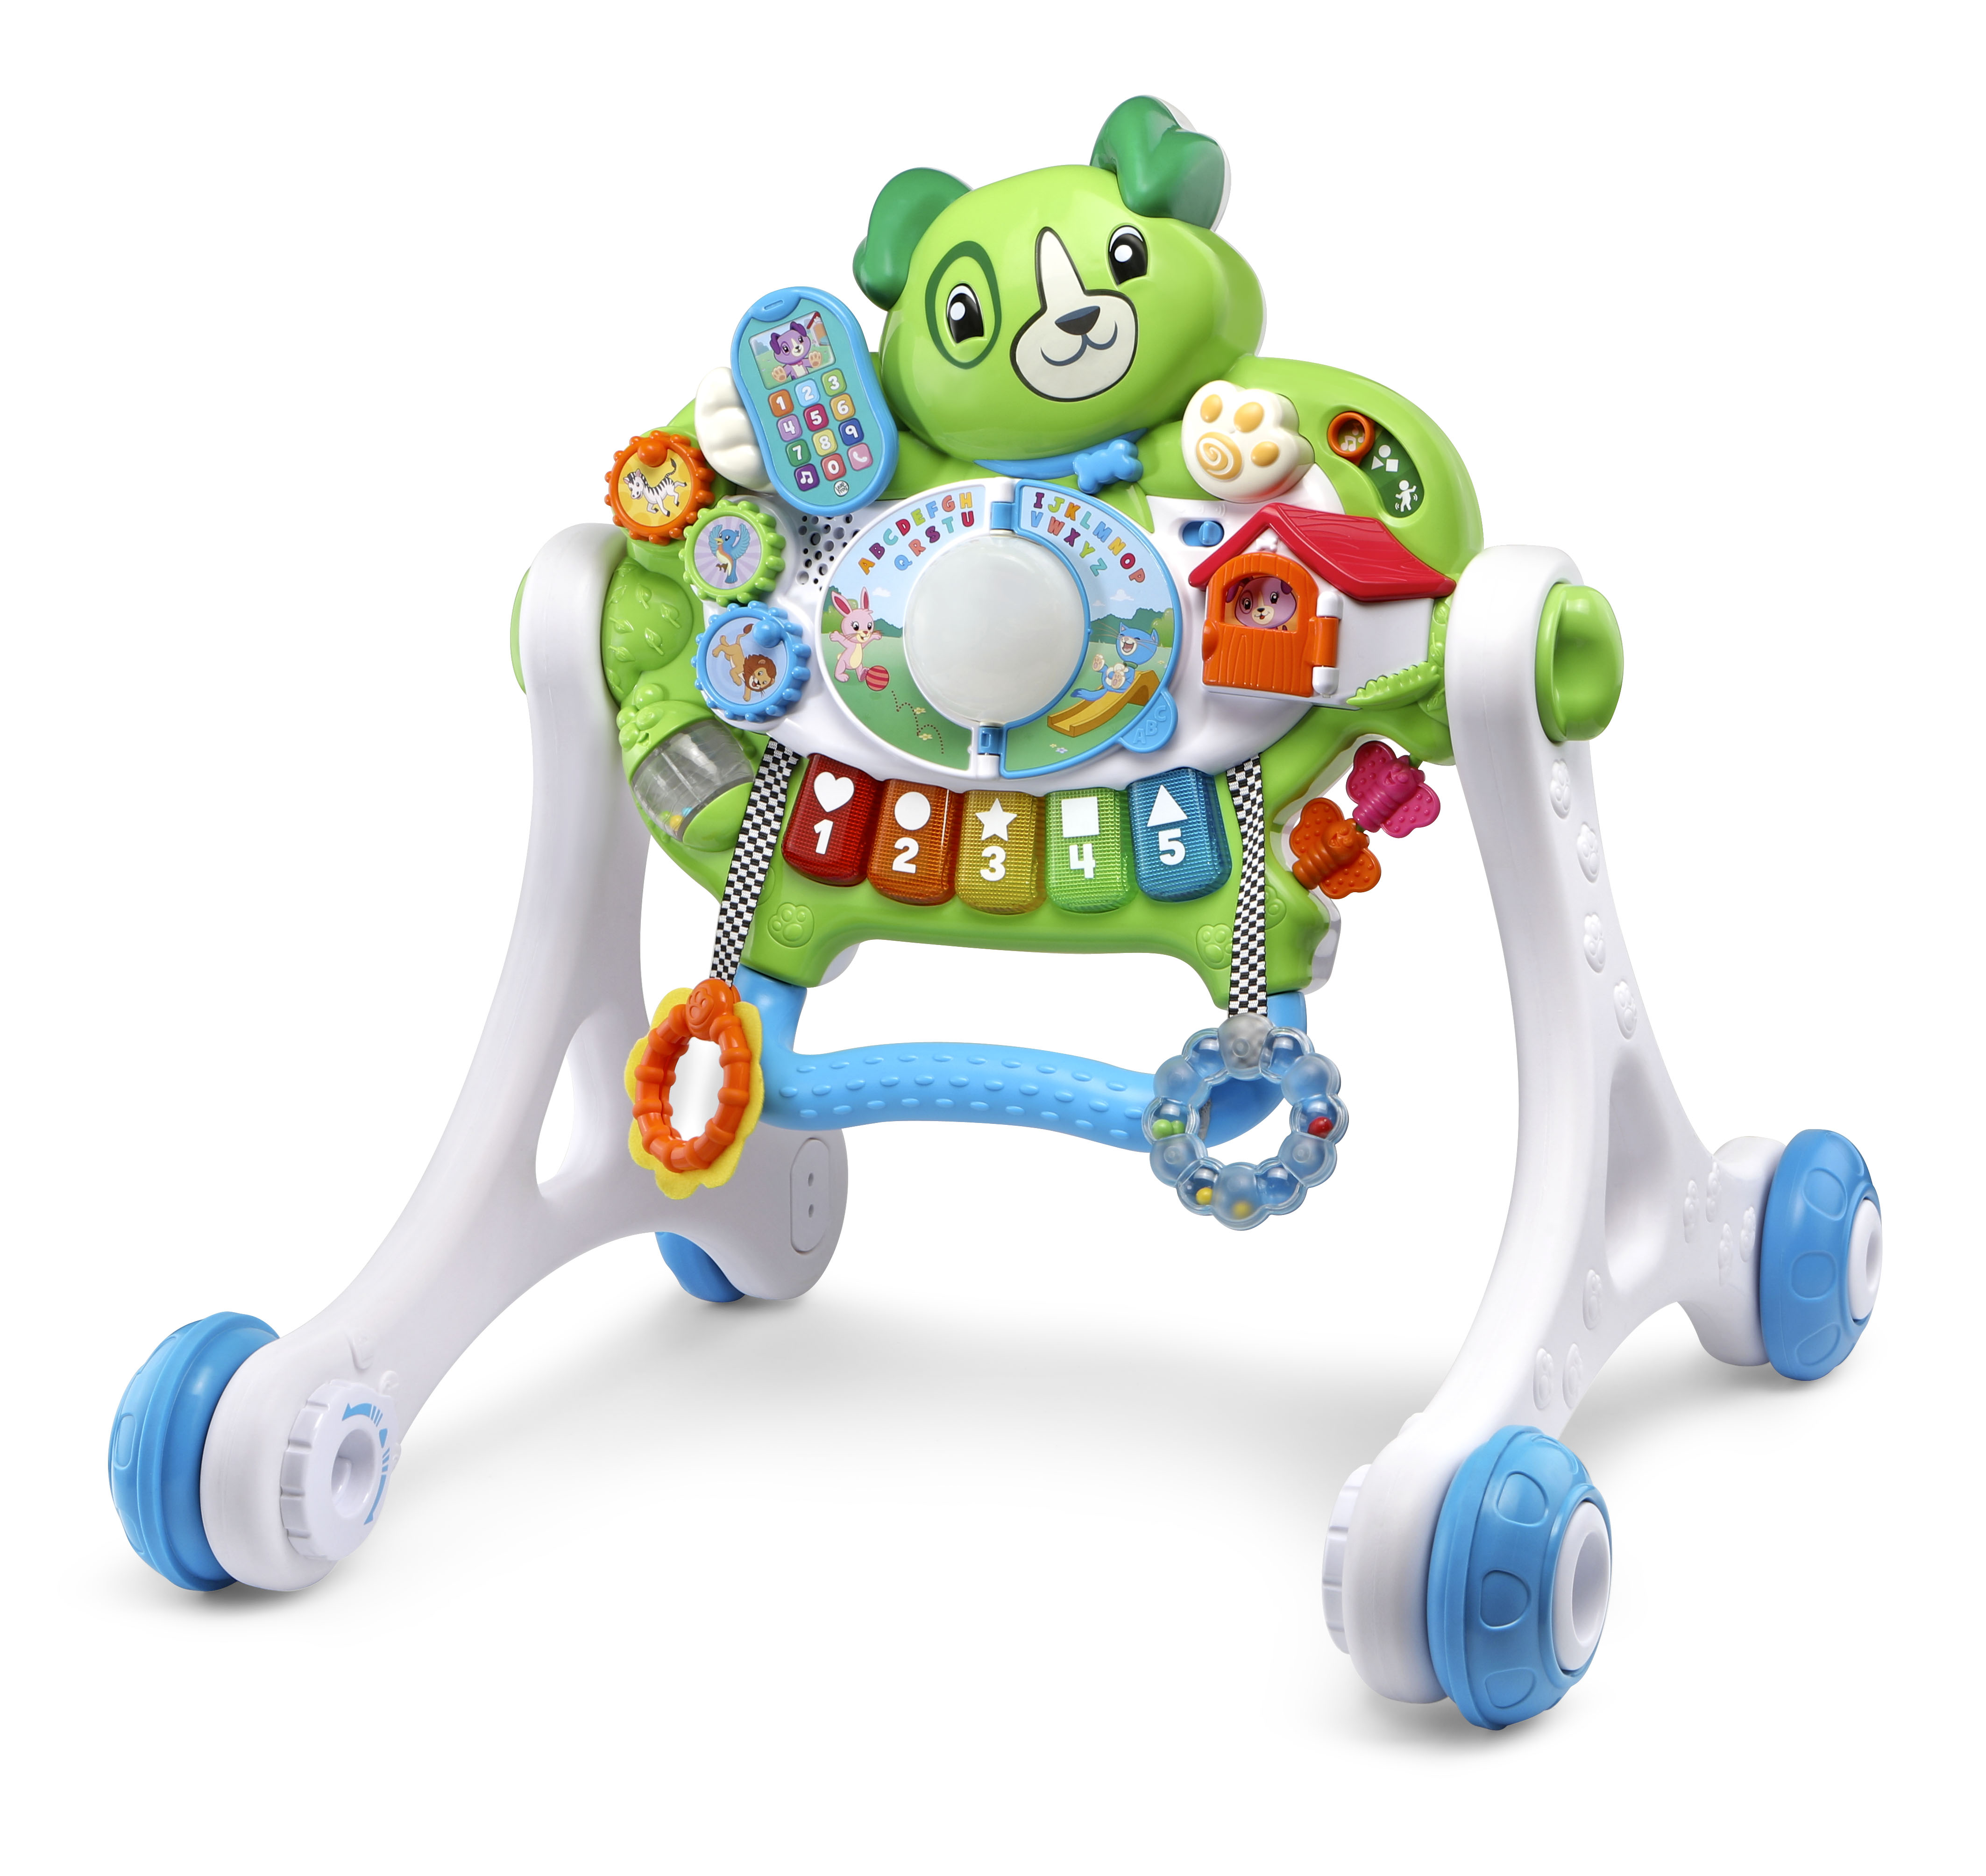 Scout's 3-in-1 Get Up and Go Walker, Baby Gym, Floor Play Toy, Green - image 4 of 11